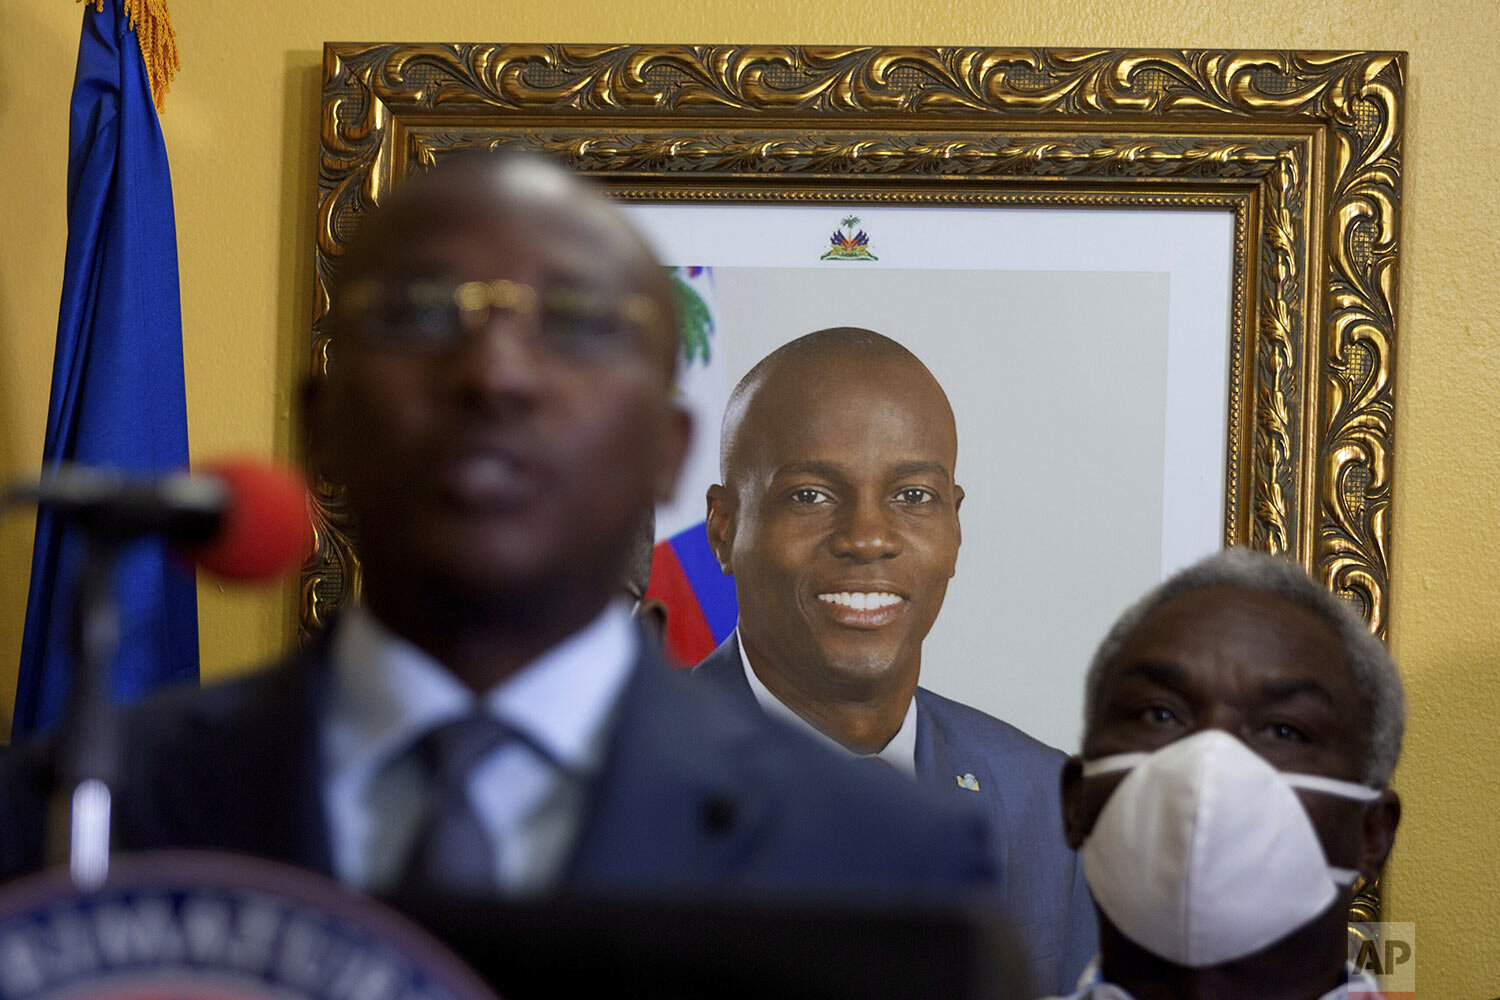  A picture of late Haitian President Jovenel Moise hangs on the wall of his former residence, behind interim Prime Minister Claude Joseph giving a press conference in Port-au-Prince, Tuesday, July 13, 2021. Authorities in Haiti forcefully pushed back